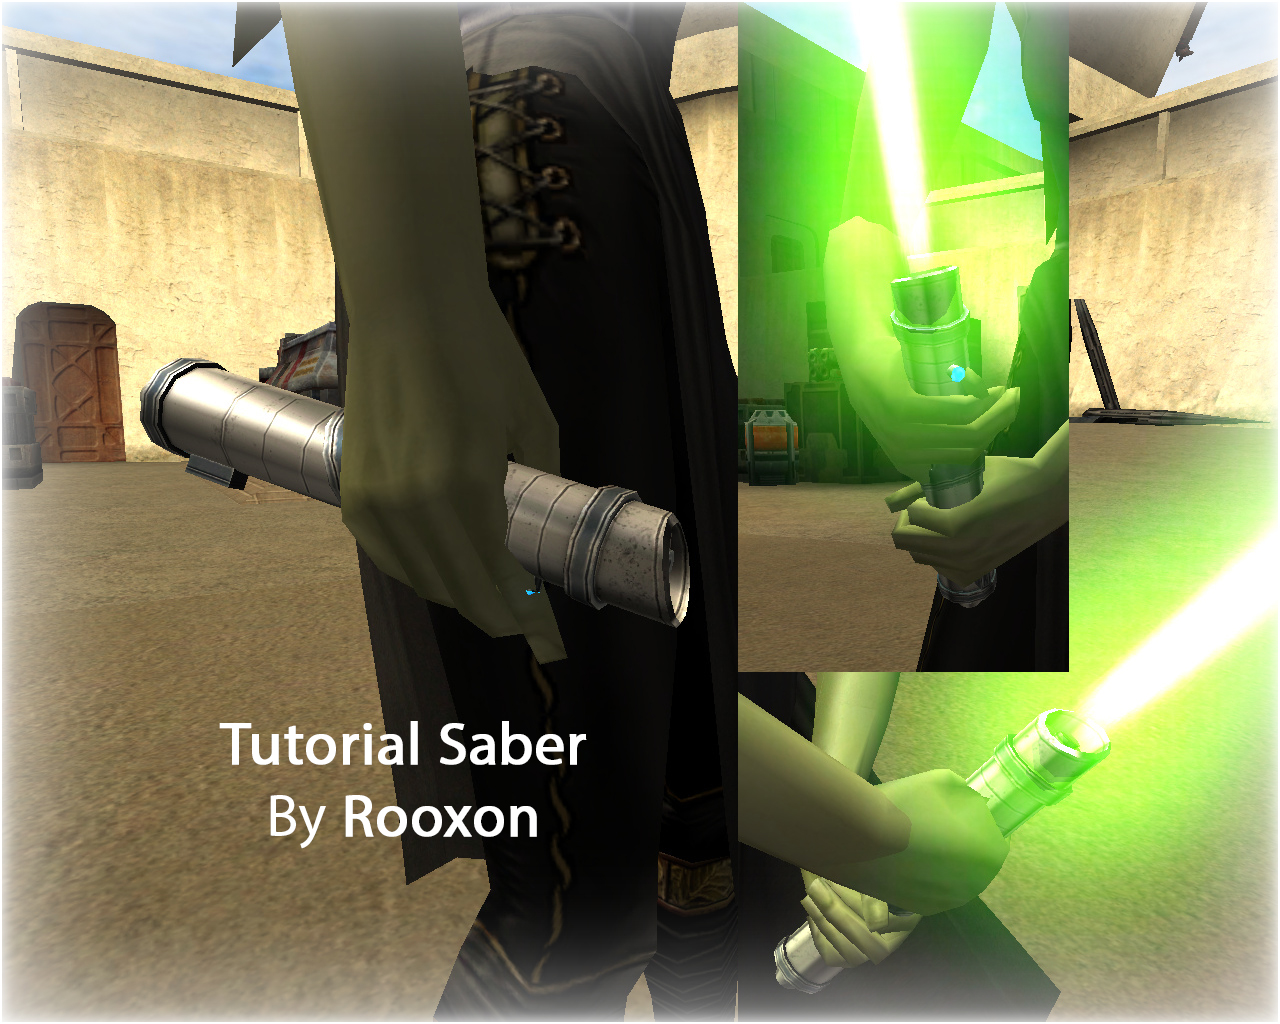 More information about "Tutorial Lightsaber"